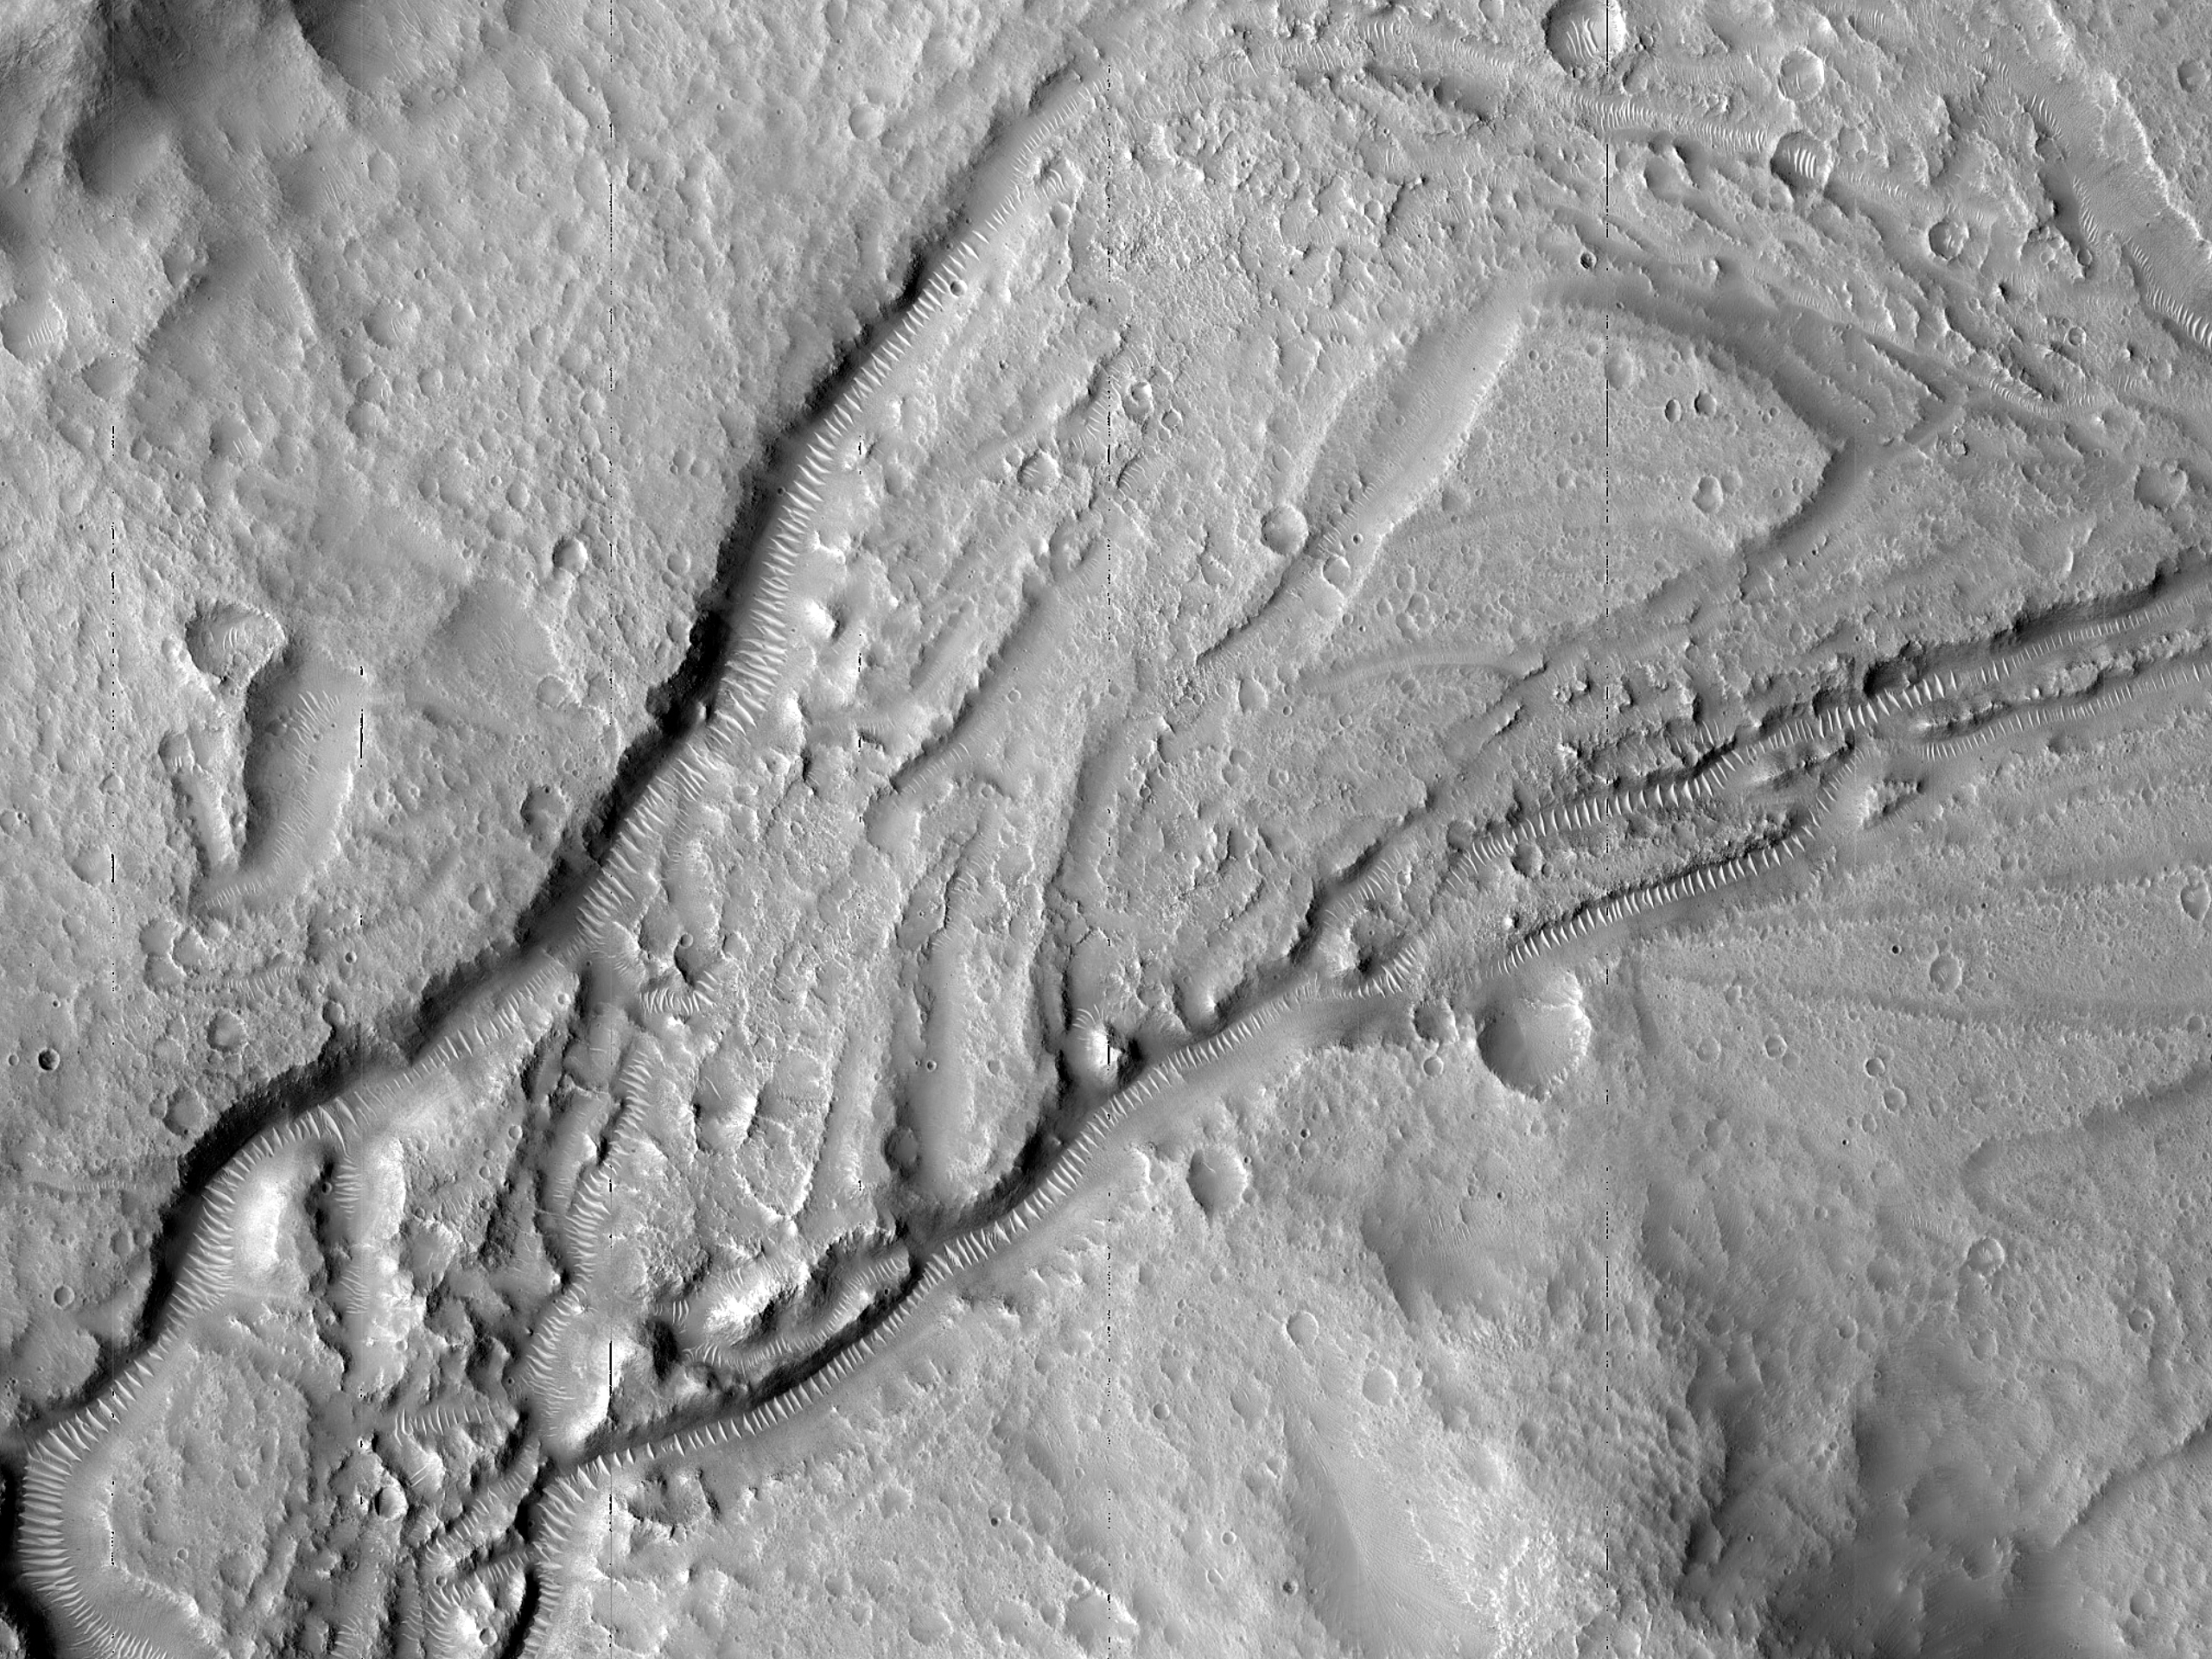 Meandering Channels on the Western Edge of Acidalia Planitia